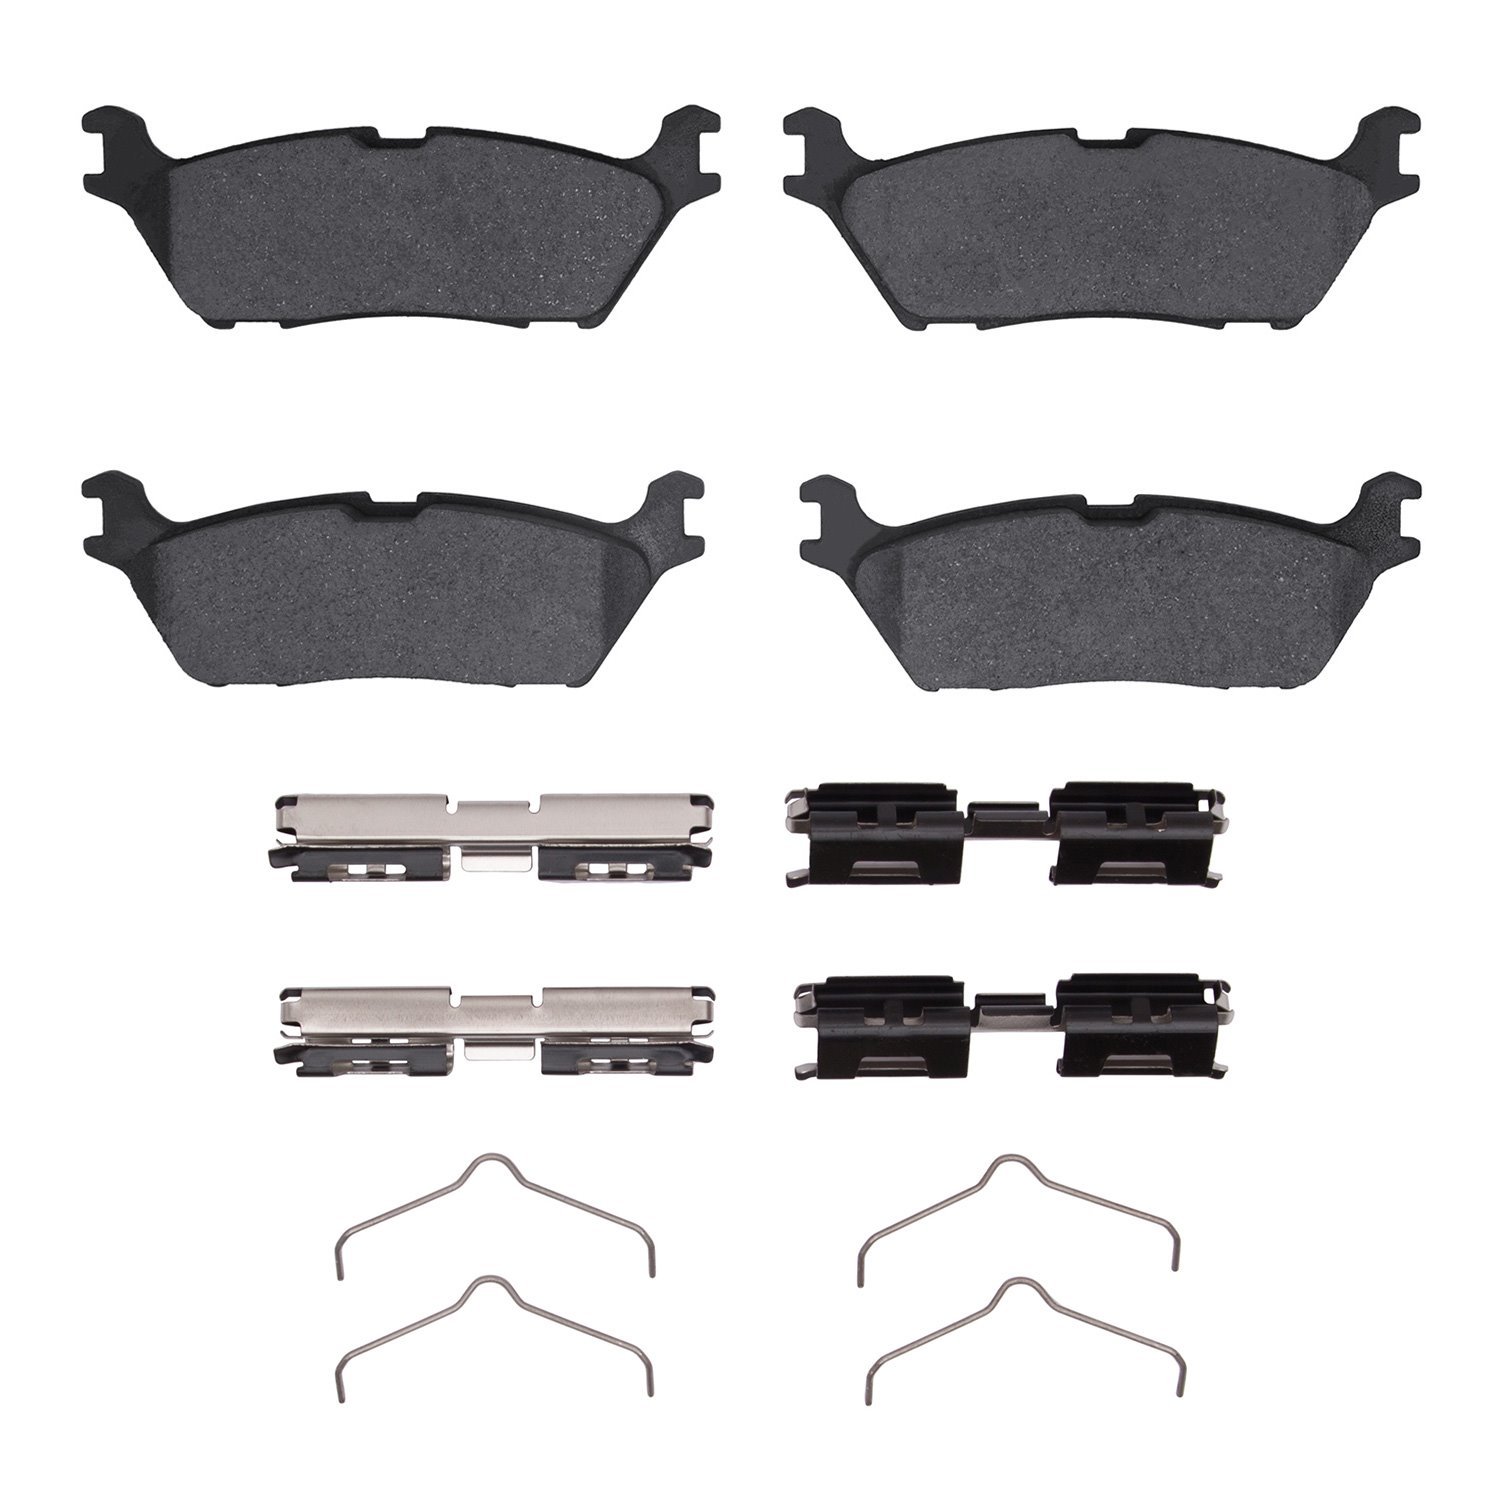 1310-2383-01 3000-Series Ceramic Brake Pads & Hardware Kit, Fits Select Ford/Lincoln/Mercury/Mazda, Position: Rear